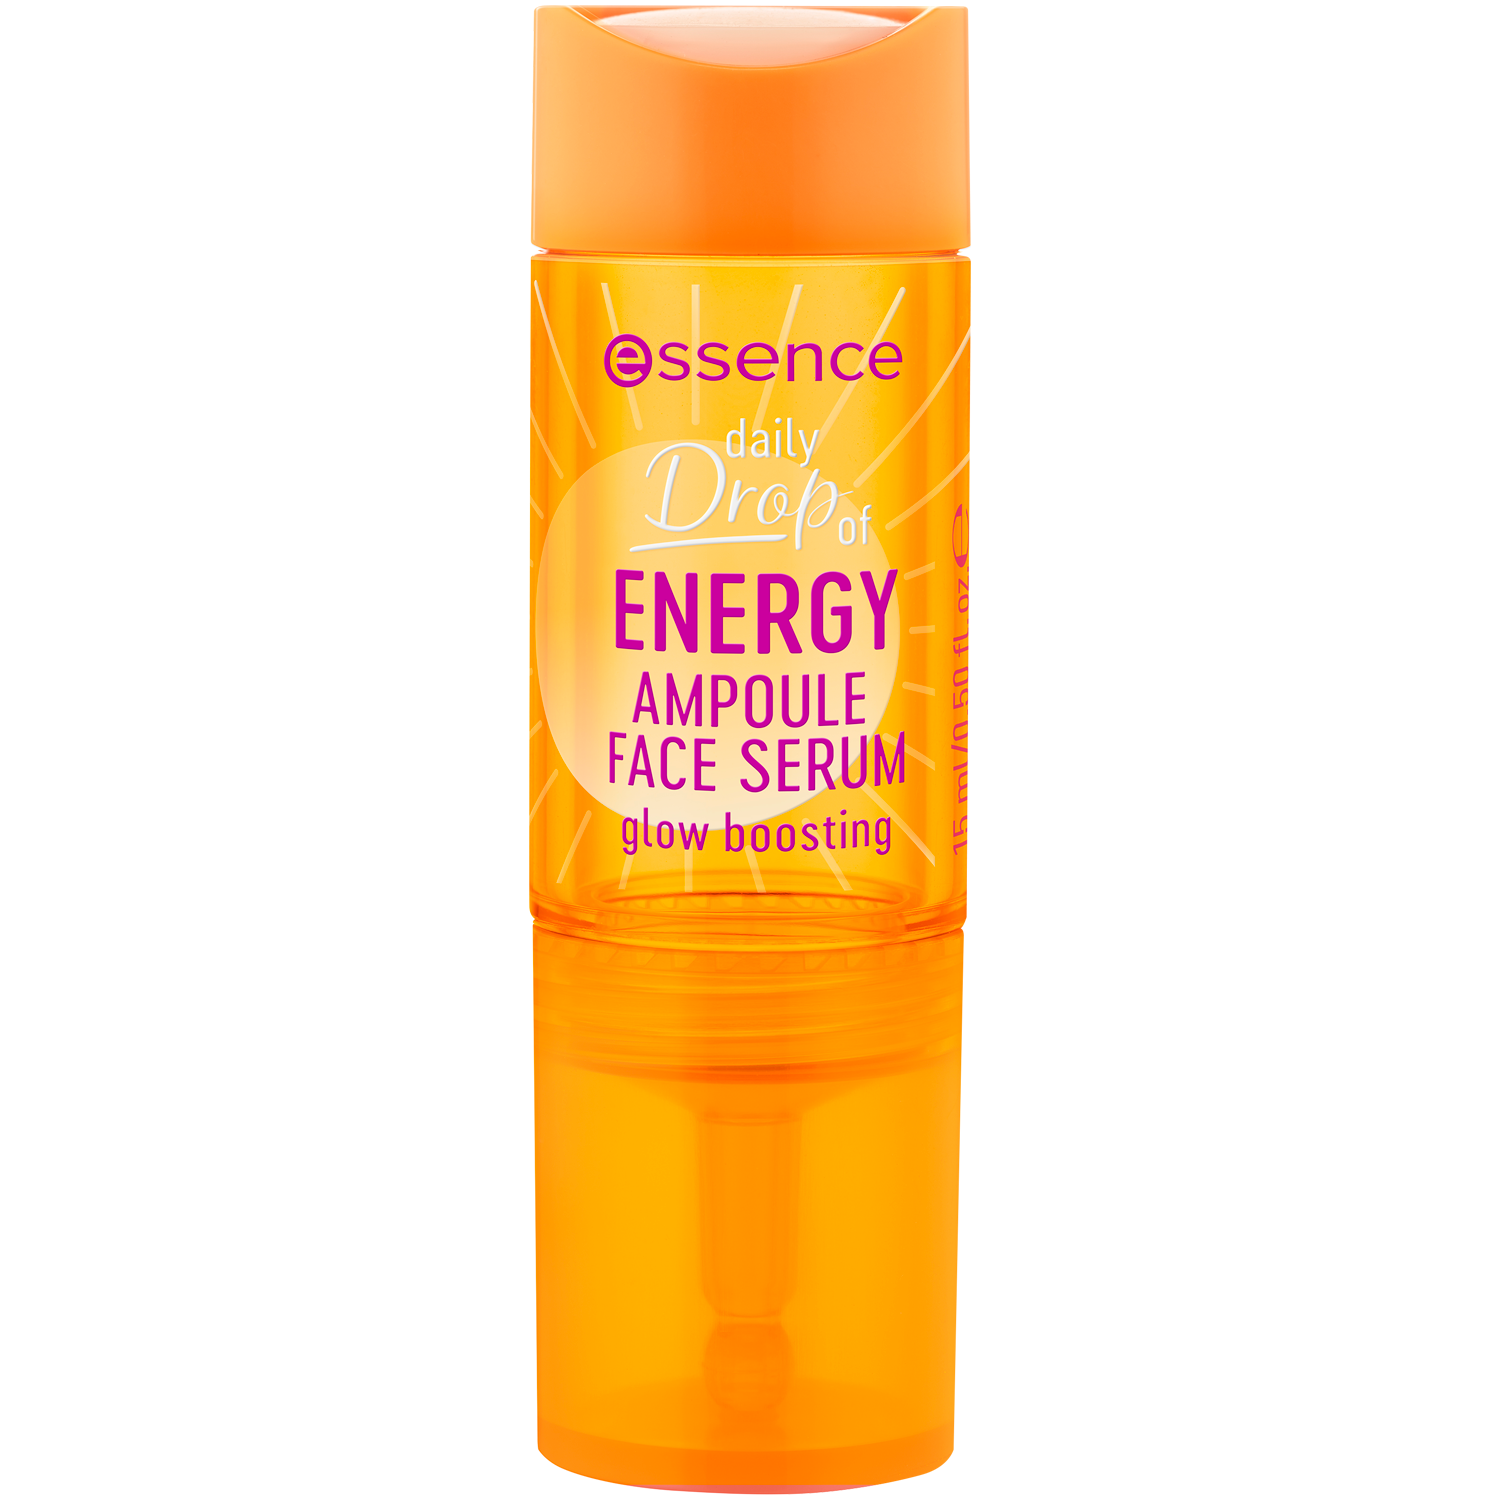 Essence Daily Drop Of Energy сыворотка для лица, 15 мл расслабляющая сыворотка для лица essence daily drop of beauty sleep ampoule face serum 15 мл